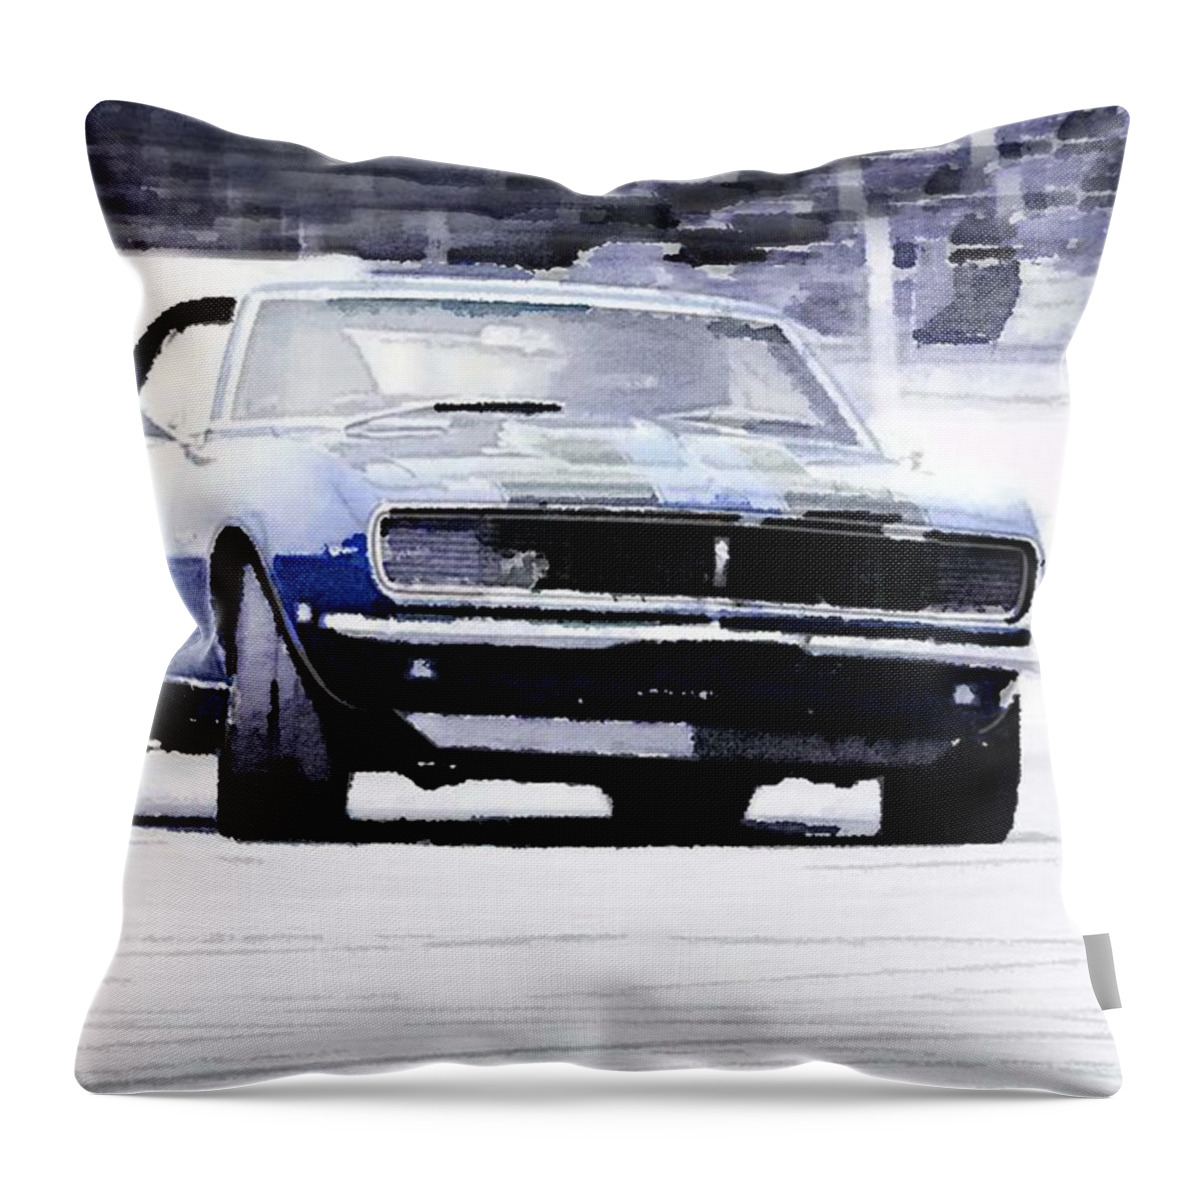 Chevy Camaro Throw Pillow featuring the painting 1968 Chevy Camaro Watercolor by Naxart Studio